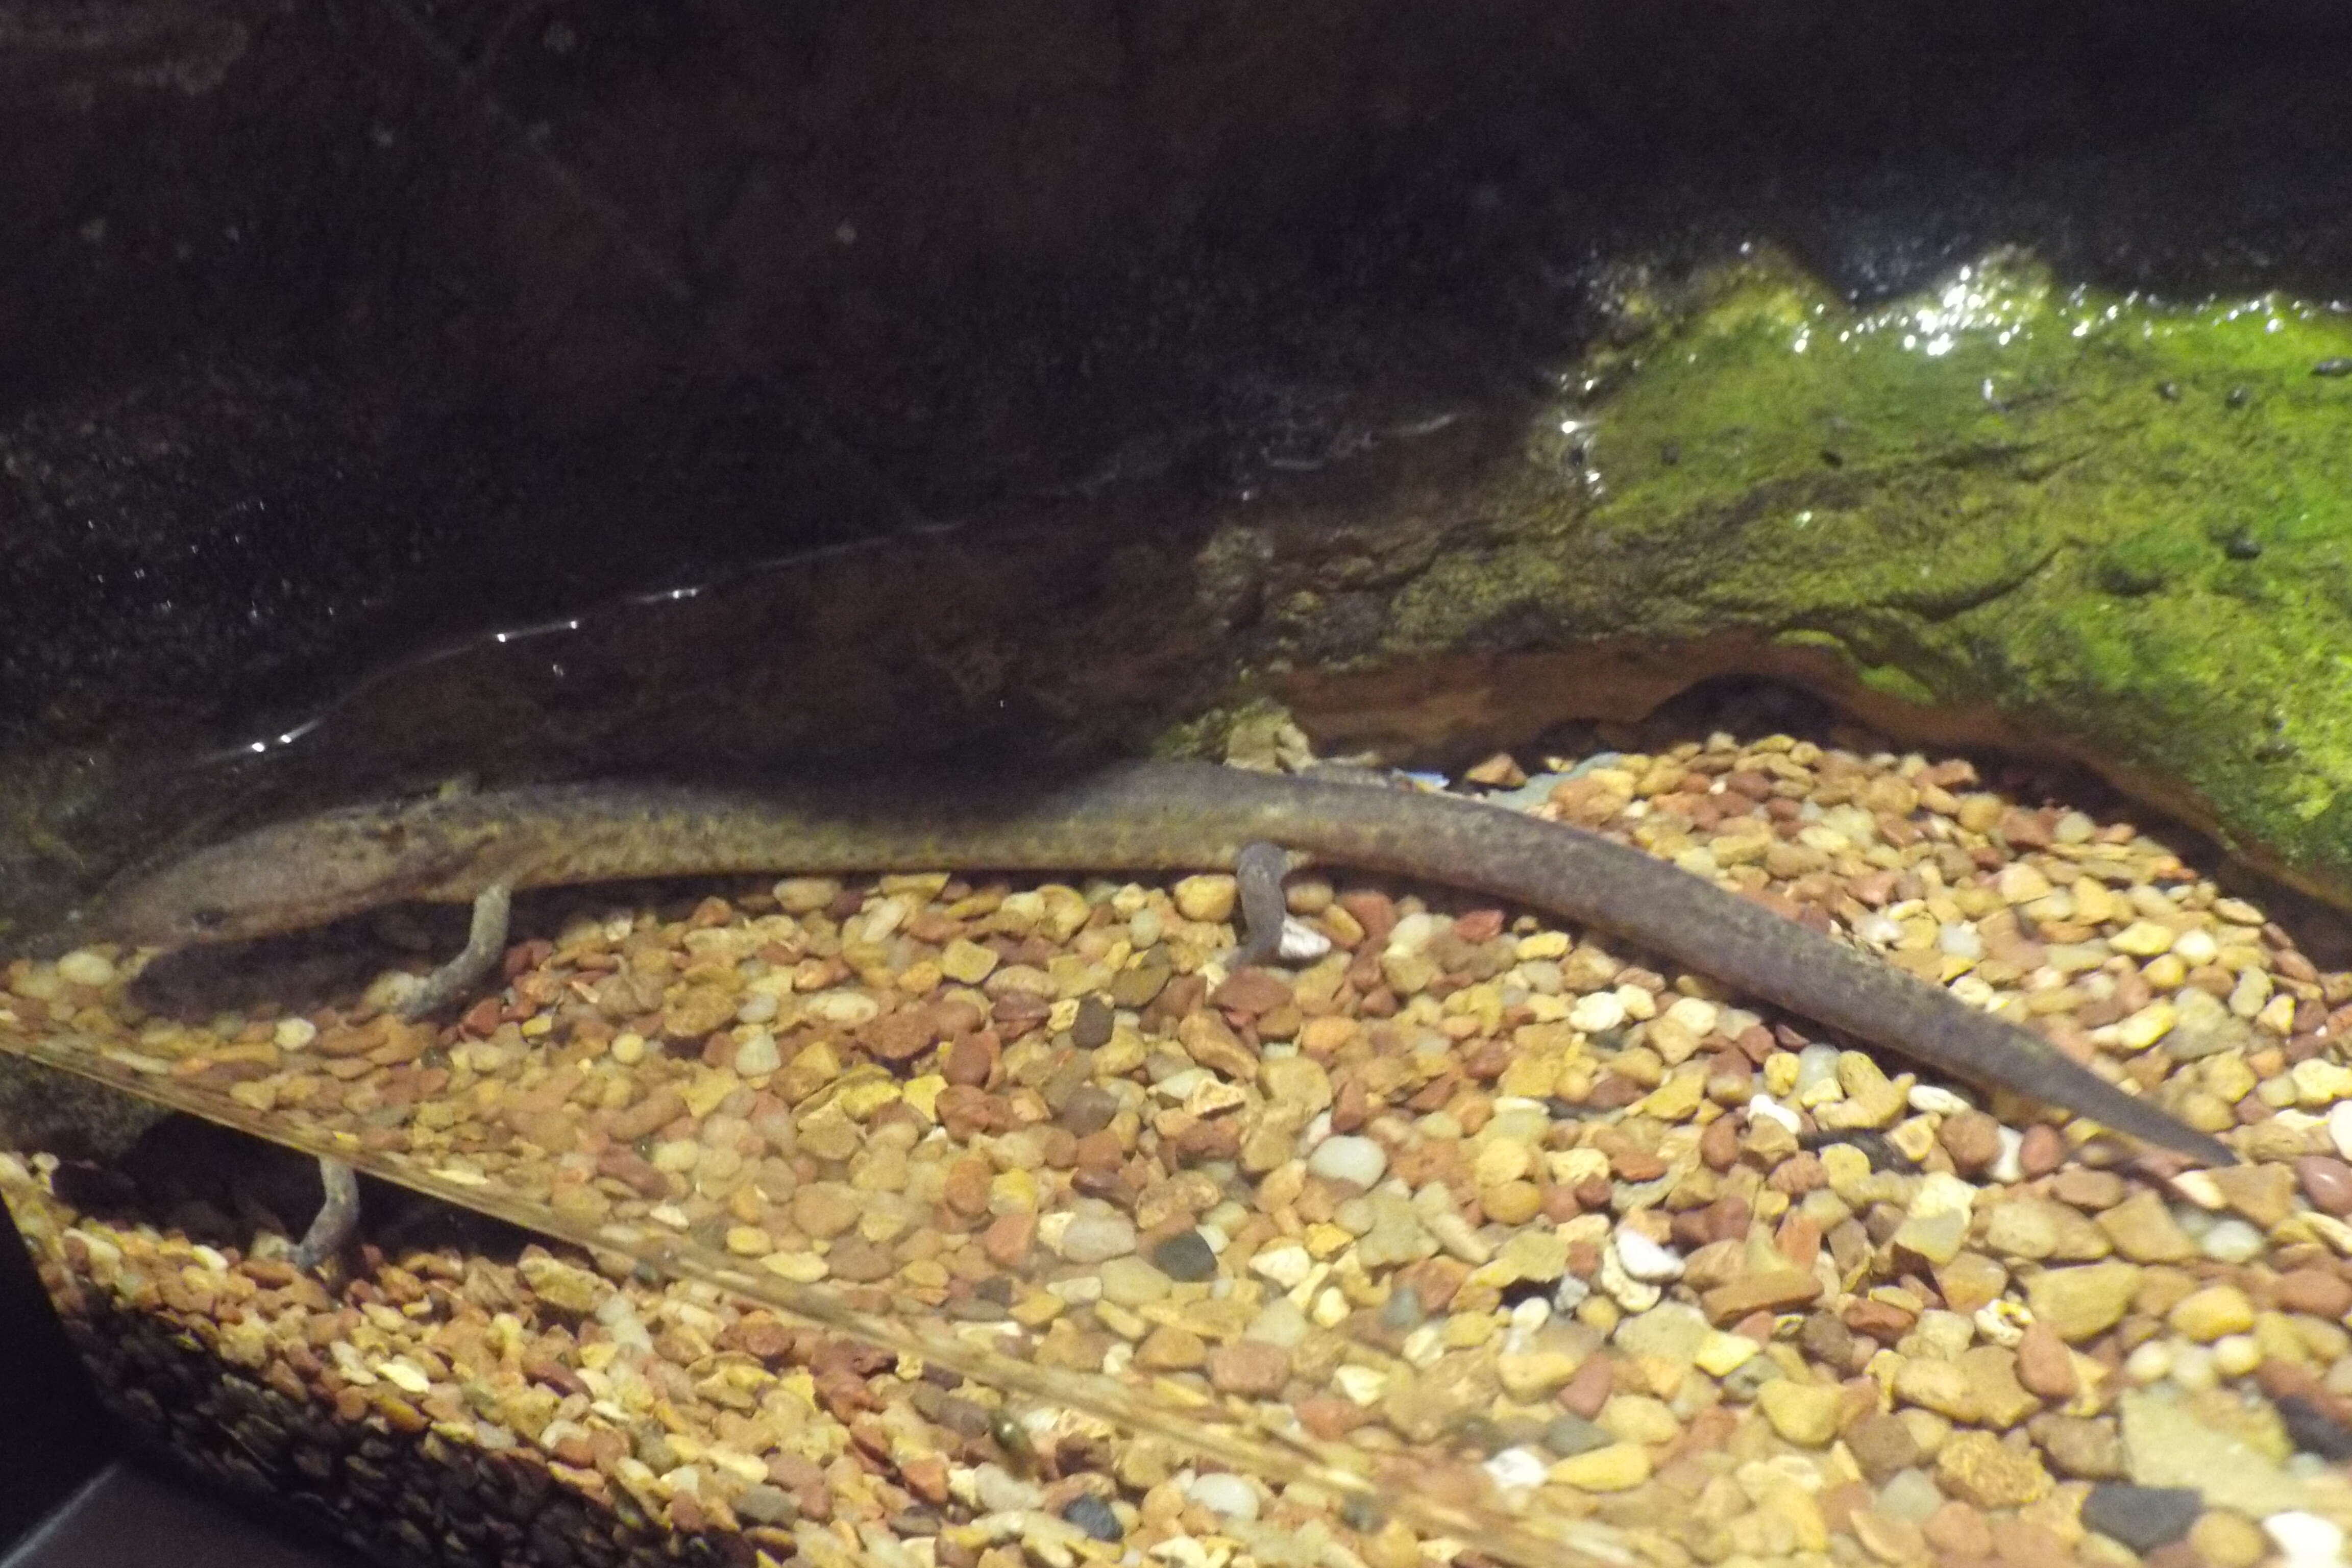 Image of Tennessee Cave Salamander